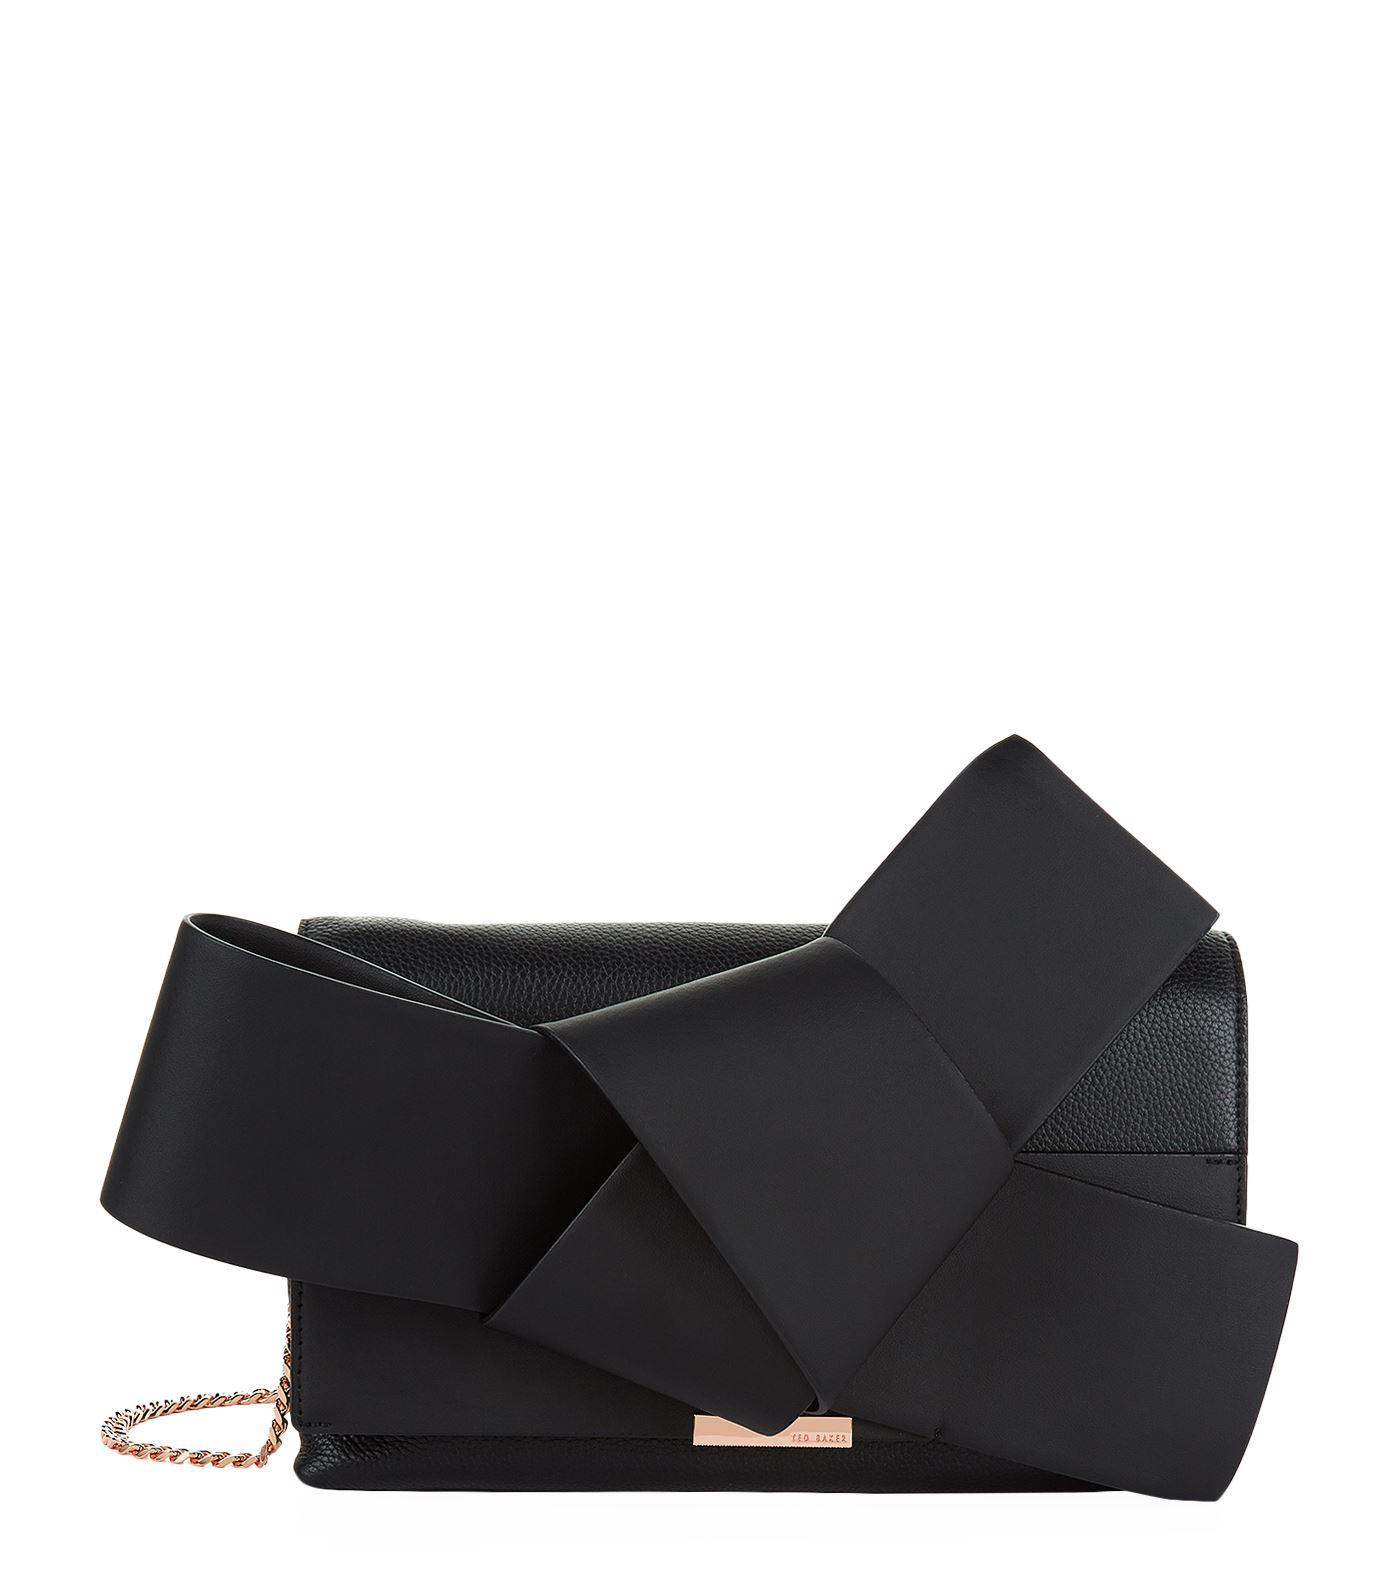 Ted Baker Leather Asterr Giant Bow Clutch Bag in Black - Lyst